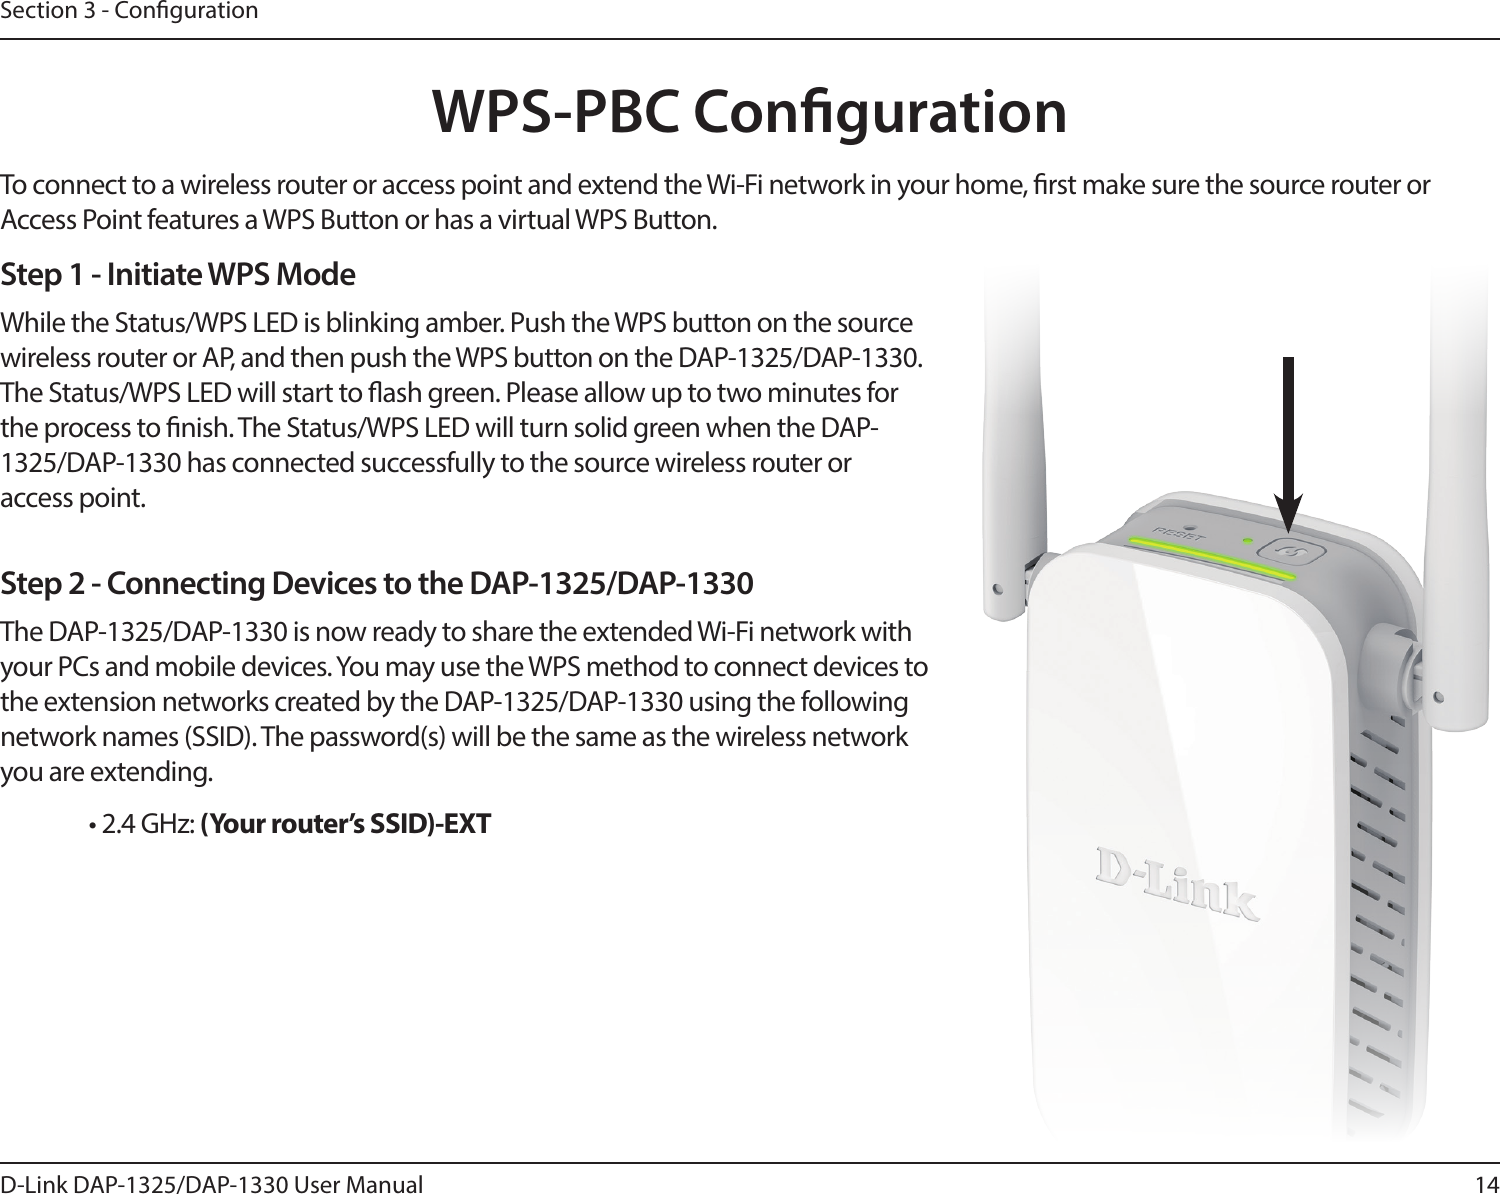 14D-Link DAP-1325/DAP-1330 User ManualSection 3 - CongurationWPS-PBC CongurationStep 1 - Initiate WPS ModeWhile the Status/WPS LED is blinking amber. Push the WPS button on the source wireless router or AP, and then push the WPS button on the DAP-1325/DAP-1330. The Status/WPS LED will start to ash green. Please allow up to two minutes for the process to nish. The Status/WPS LED will turn solid green when the DAP-1325/DAP-1330 has connected successfully to the source wireless router or access point.Step 2 - Connecting Devices to the DAP-1325/DAP-1330The DAP-1325/DAP-1330 is now ready to share the extended Wi-Fi network with your PCs and mobile devices. You may use the WPS method to connect devices to the extension networks created by the DAP-1325/DAP-1330 using the following network names (SSID). The password(s) will be the same as the wireless network you are extending.• 2.4 GHz: (Your router’s SSID)-EXTTo connect to a wireless router or access point and extend the Wi-Fi network in your home, rst make sure the source router or Access Point features a WPS Button or has a virtual WPS Button.